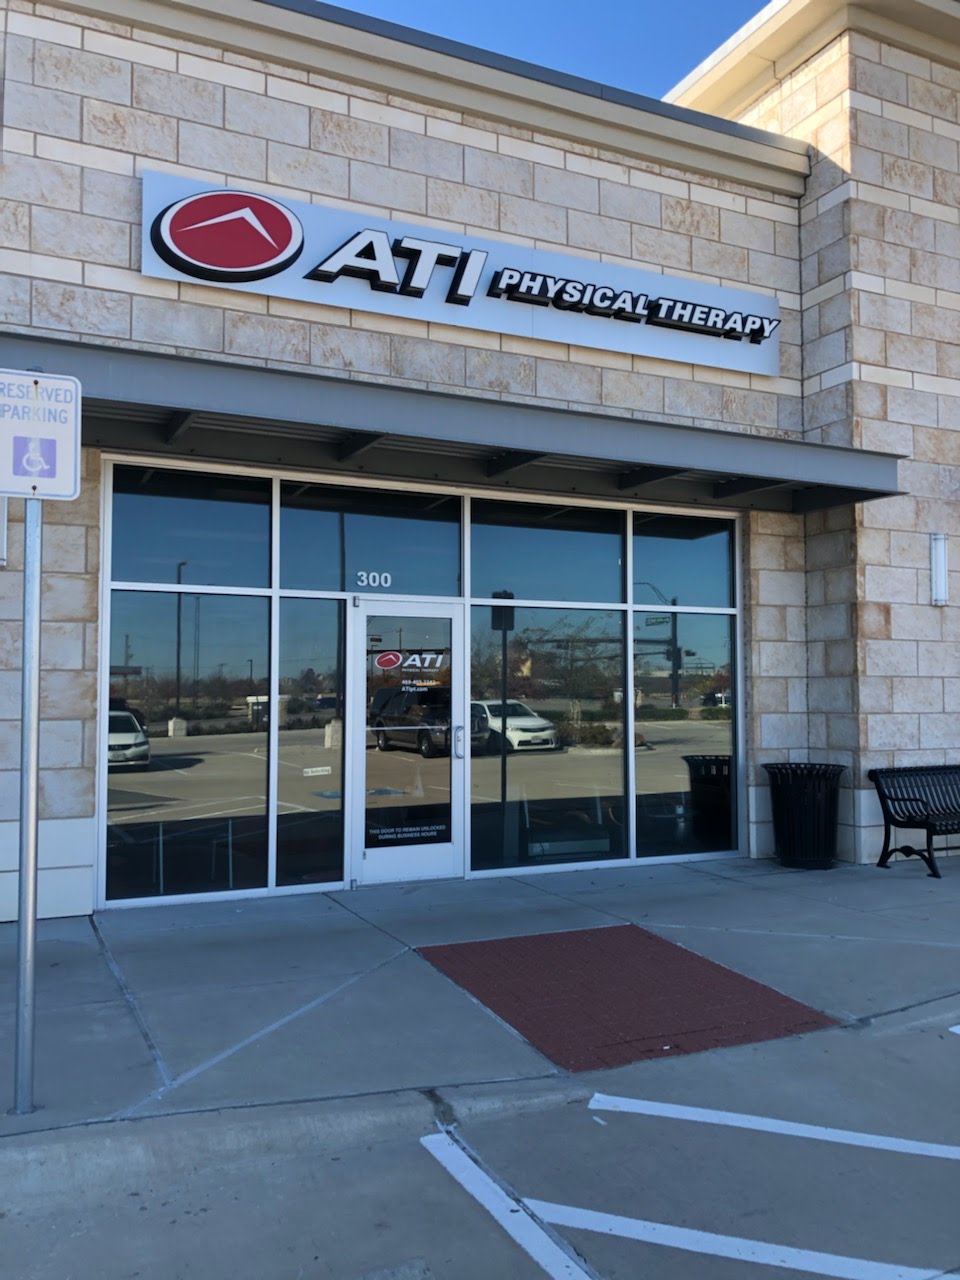 ATI Physical Therapy | 2180 FM 423 #300, Little Elm, TX 75068 | Phone: (972) 979-6577